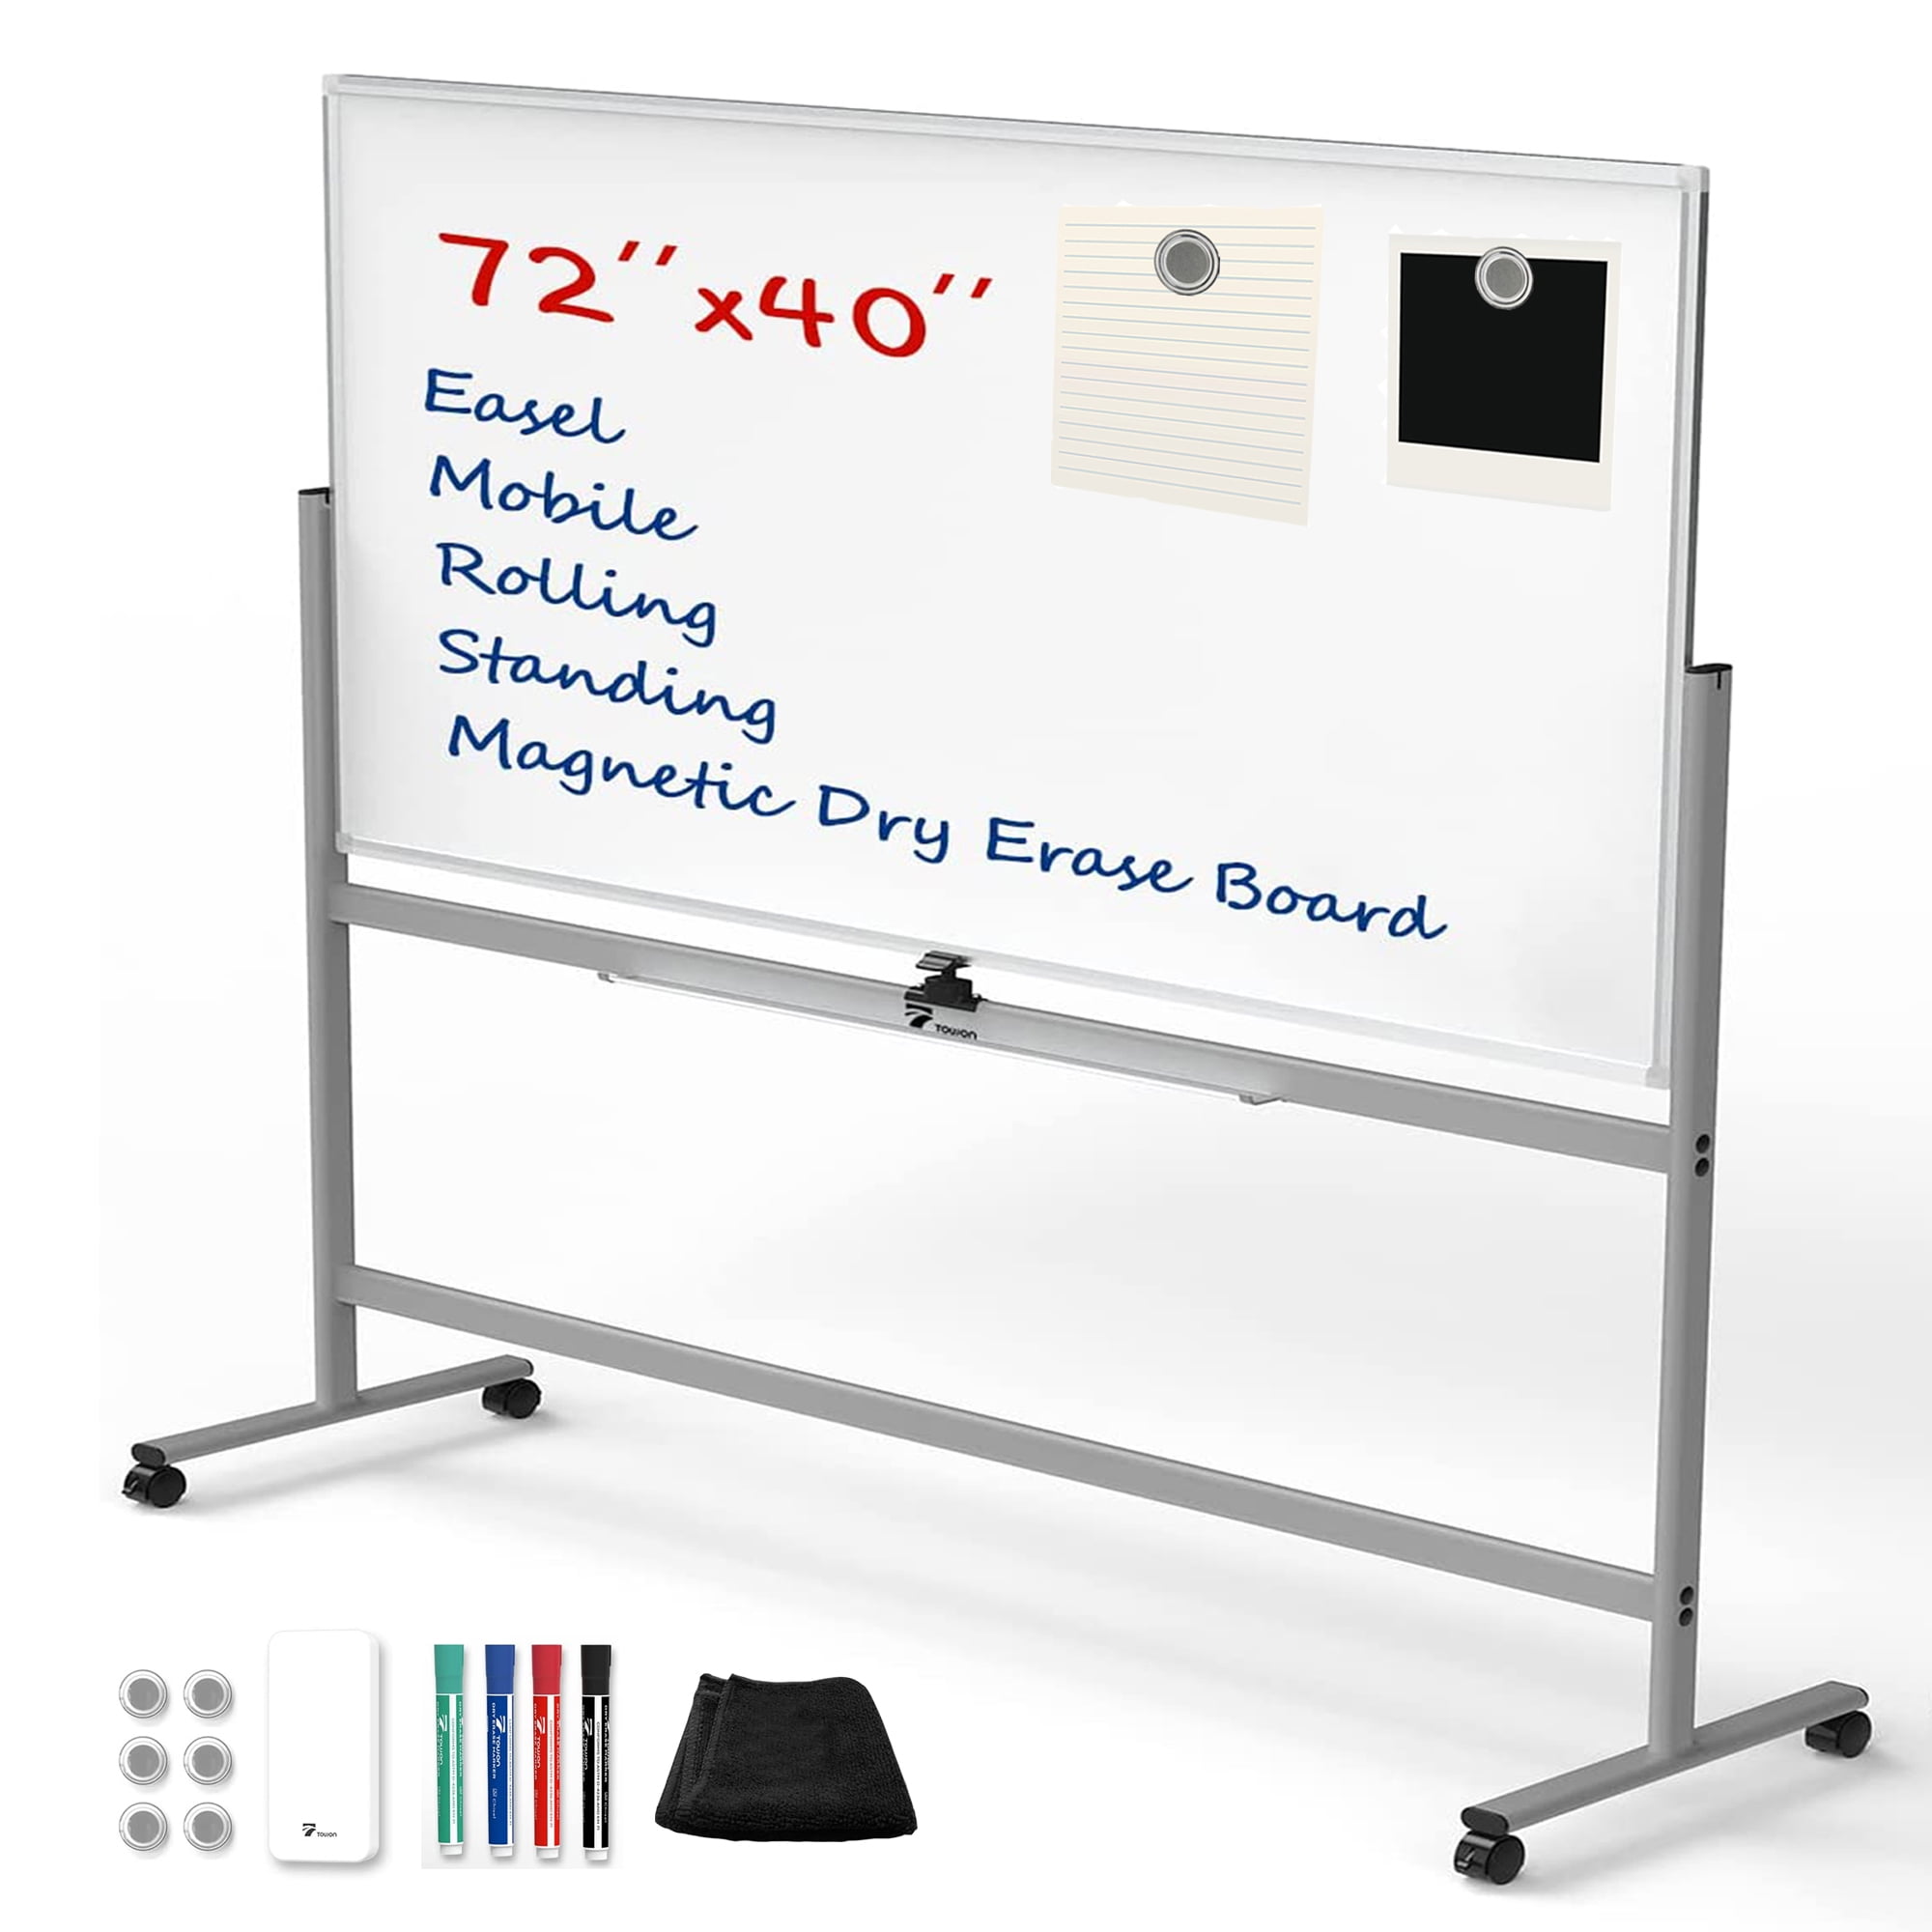 Large Magnetic Foldable Wall-Mounted Whiteboard 72X40